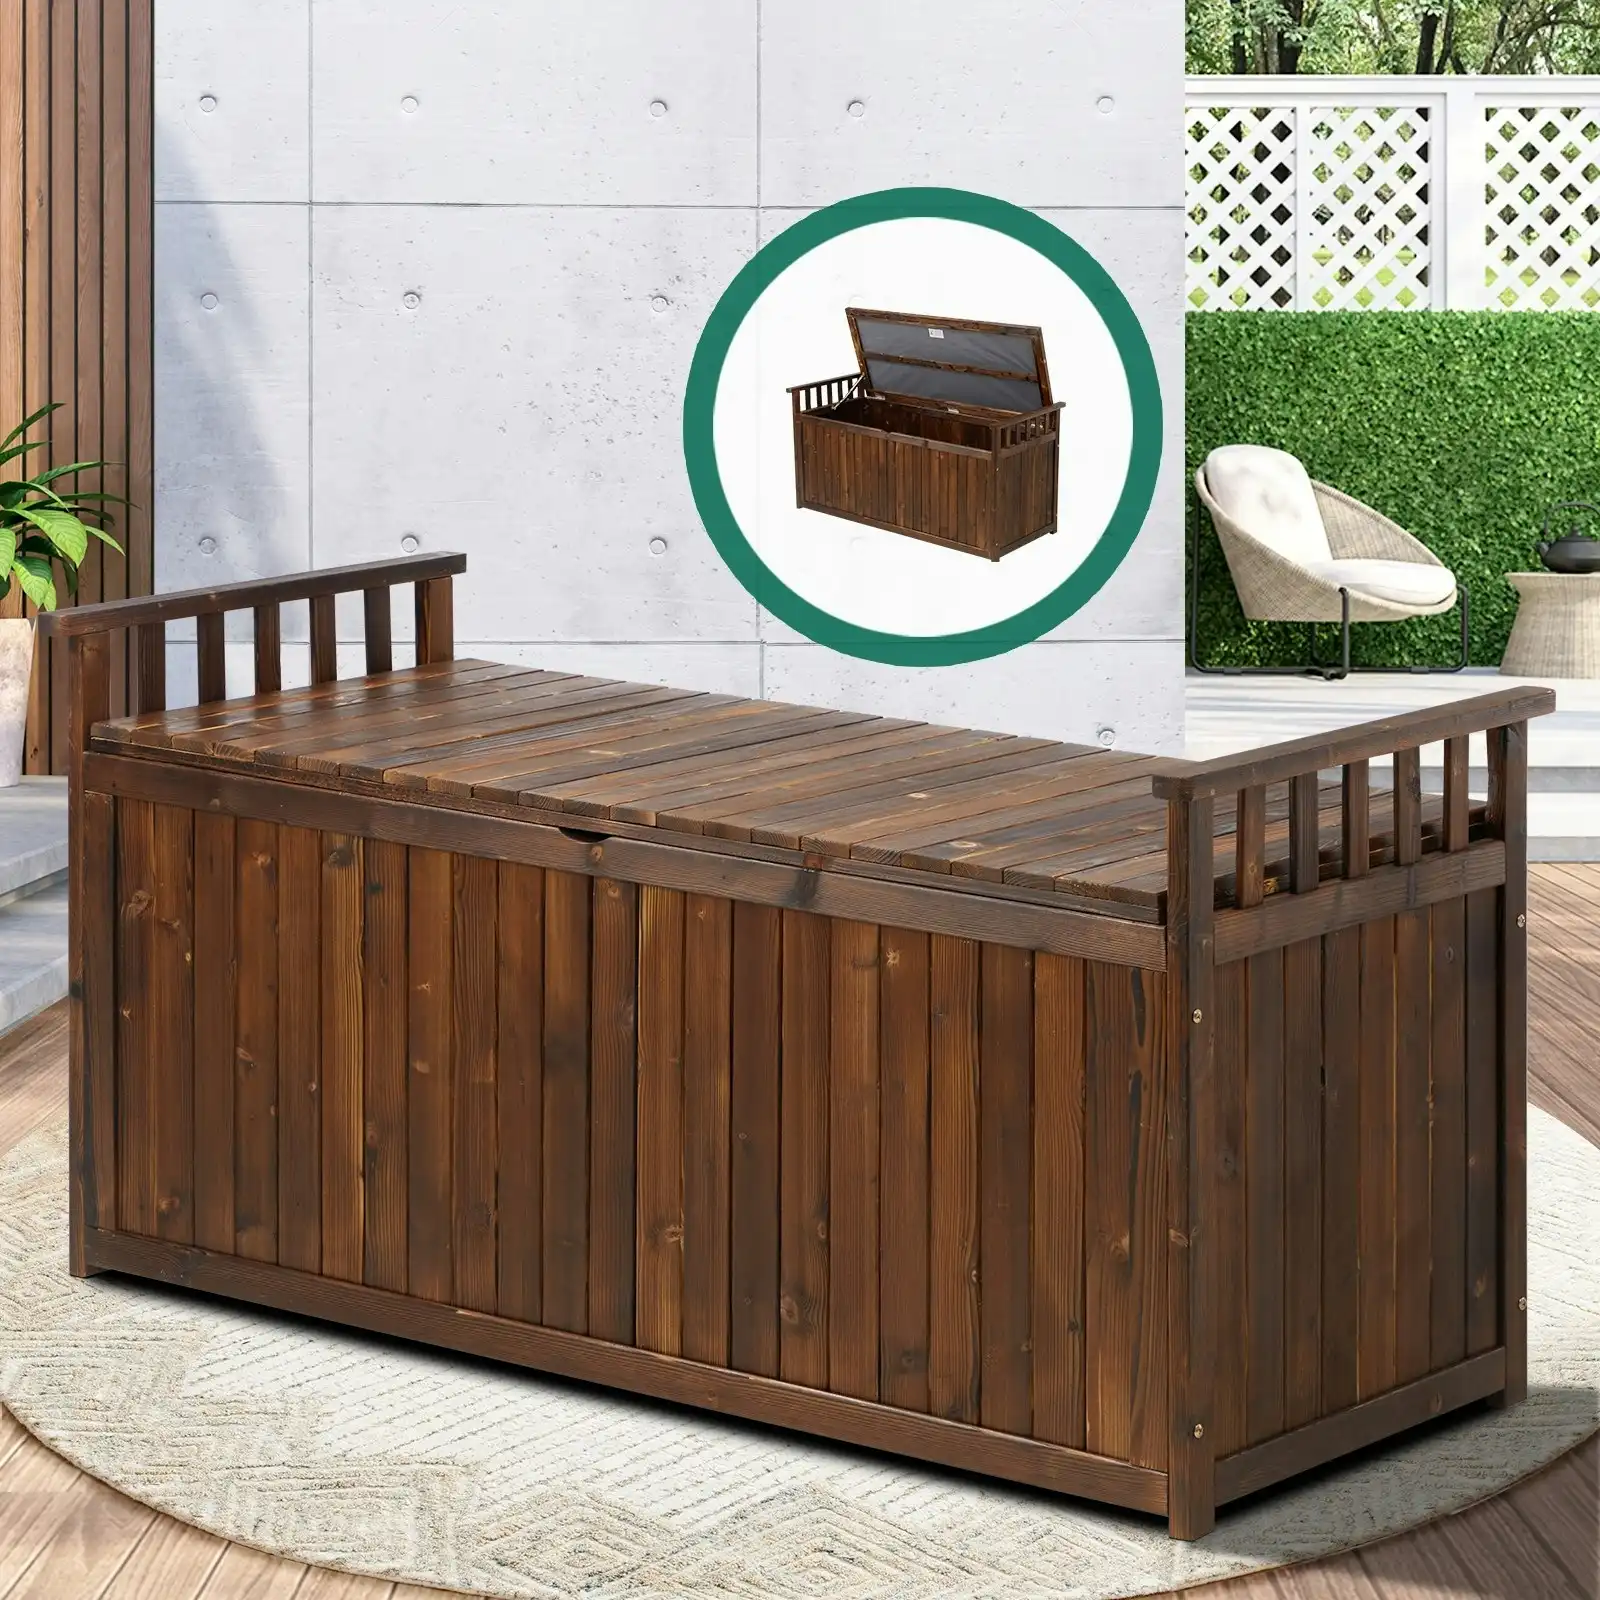 Livsip Outdoor Storage Box Garden Bench Wooden Container Cabinet 500L Large